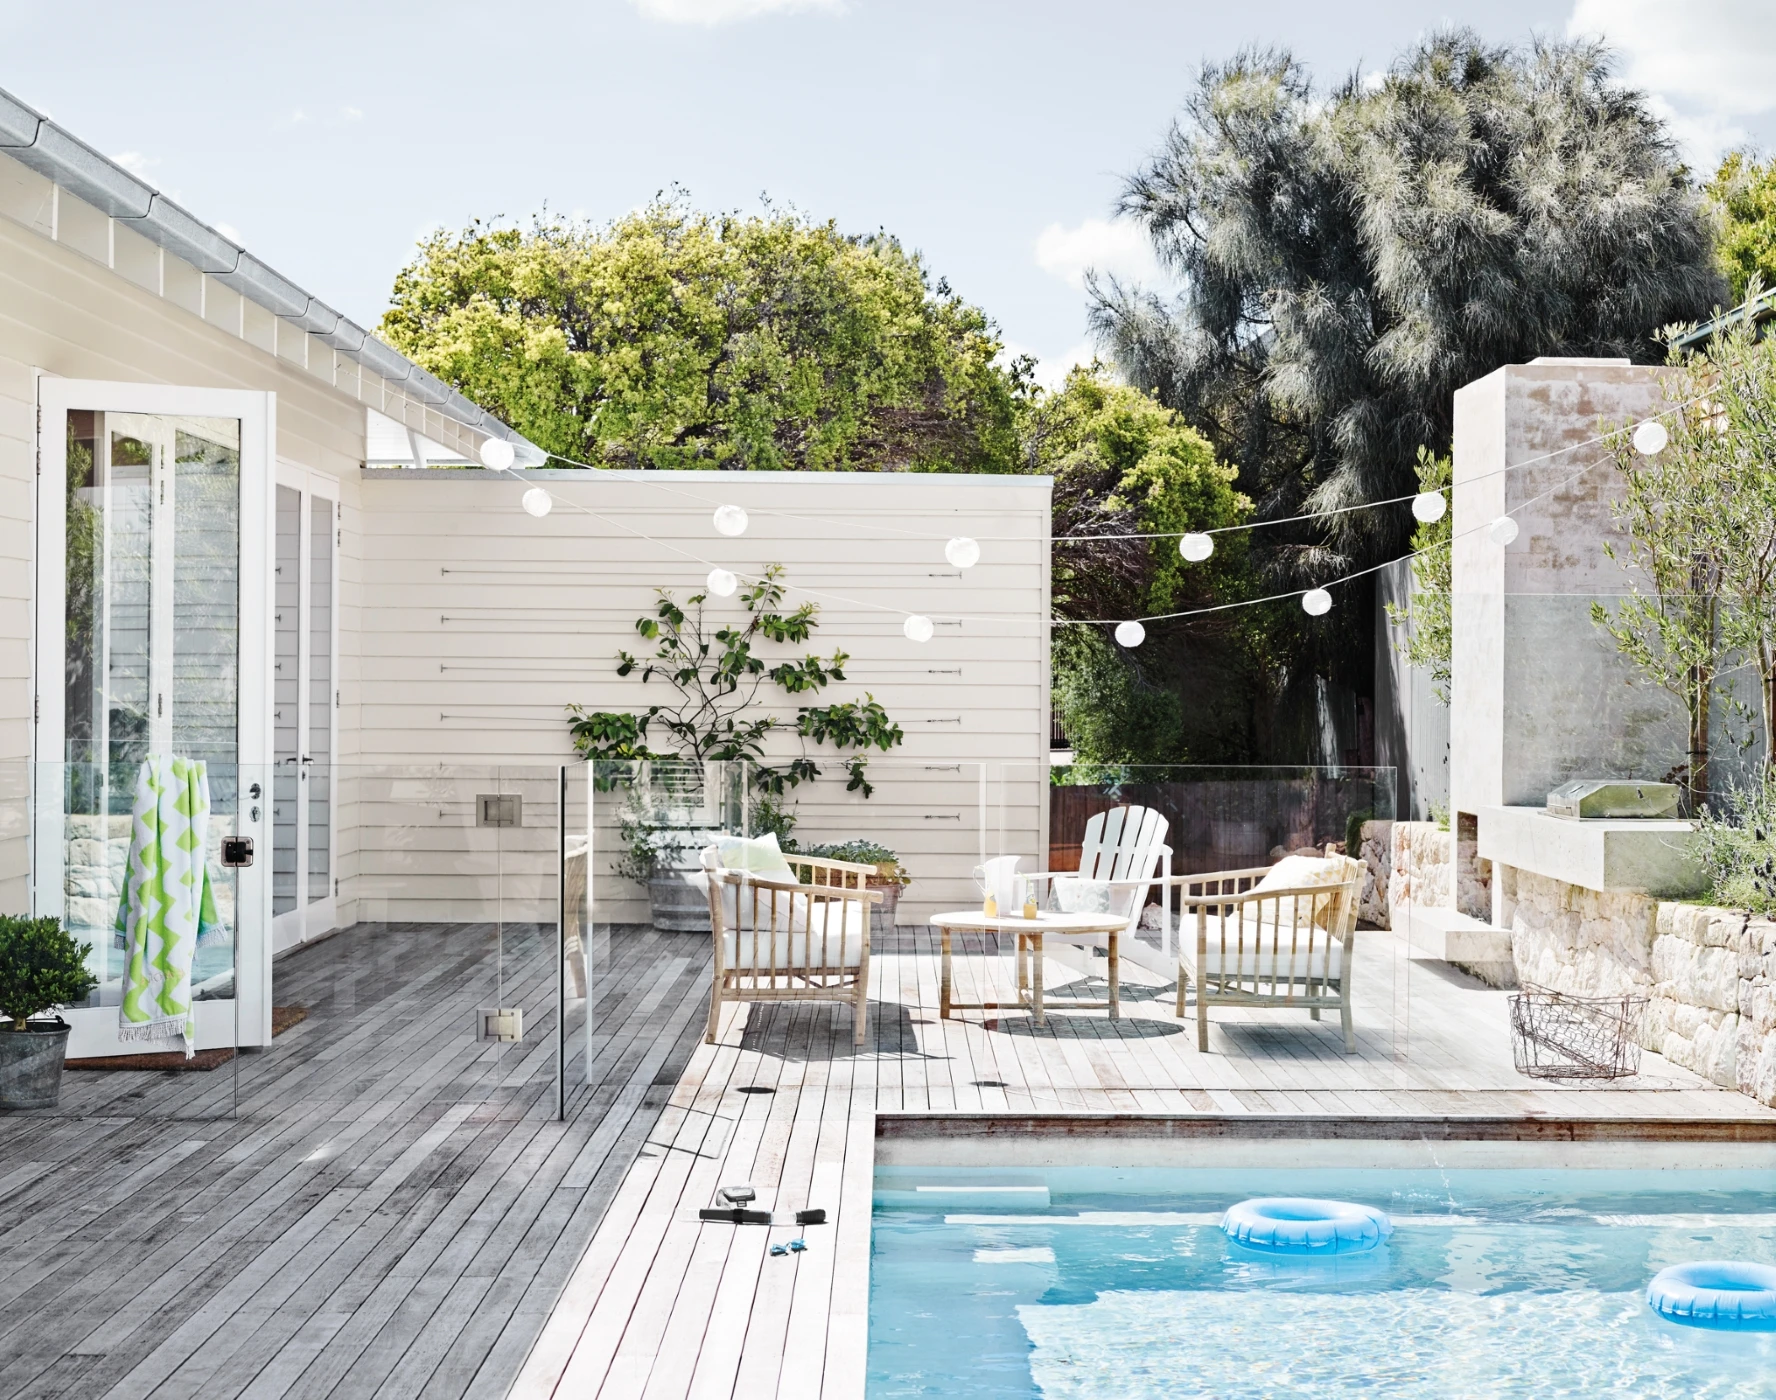 Outdoor pool area, white weatherboards, timber deck with party lights

White Duck and Vivid White™